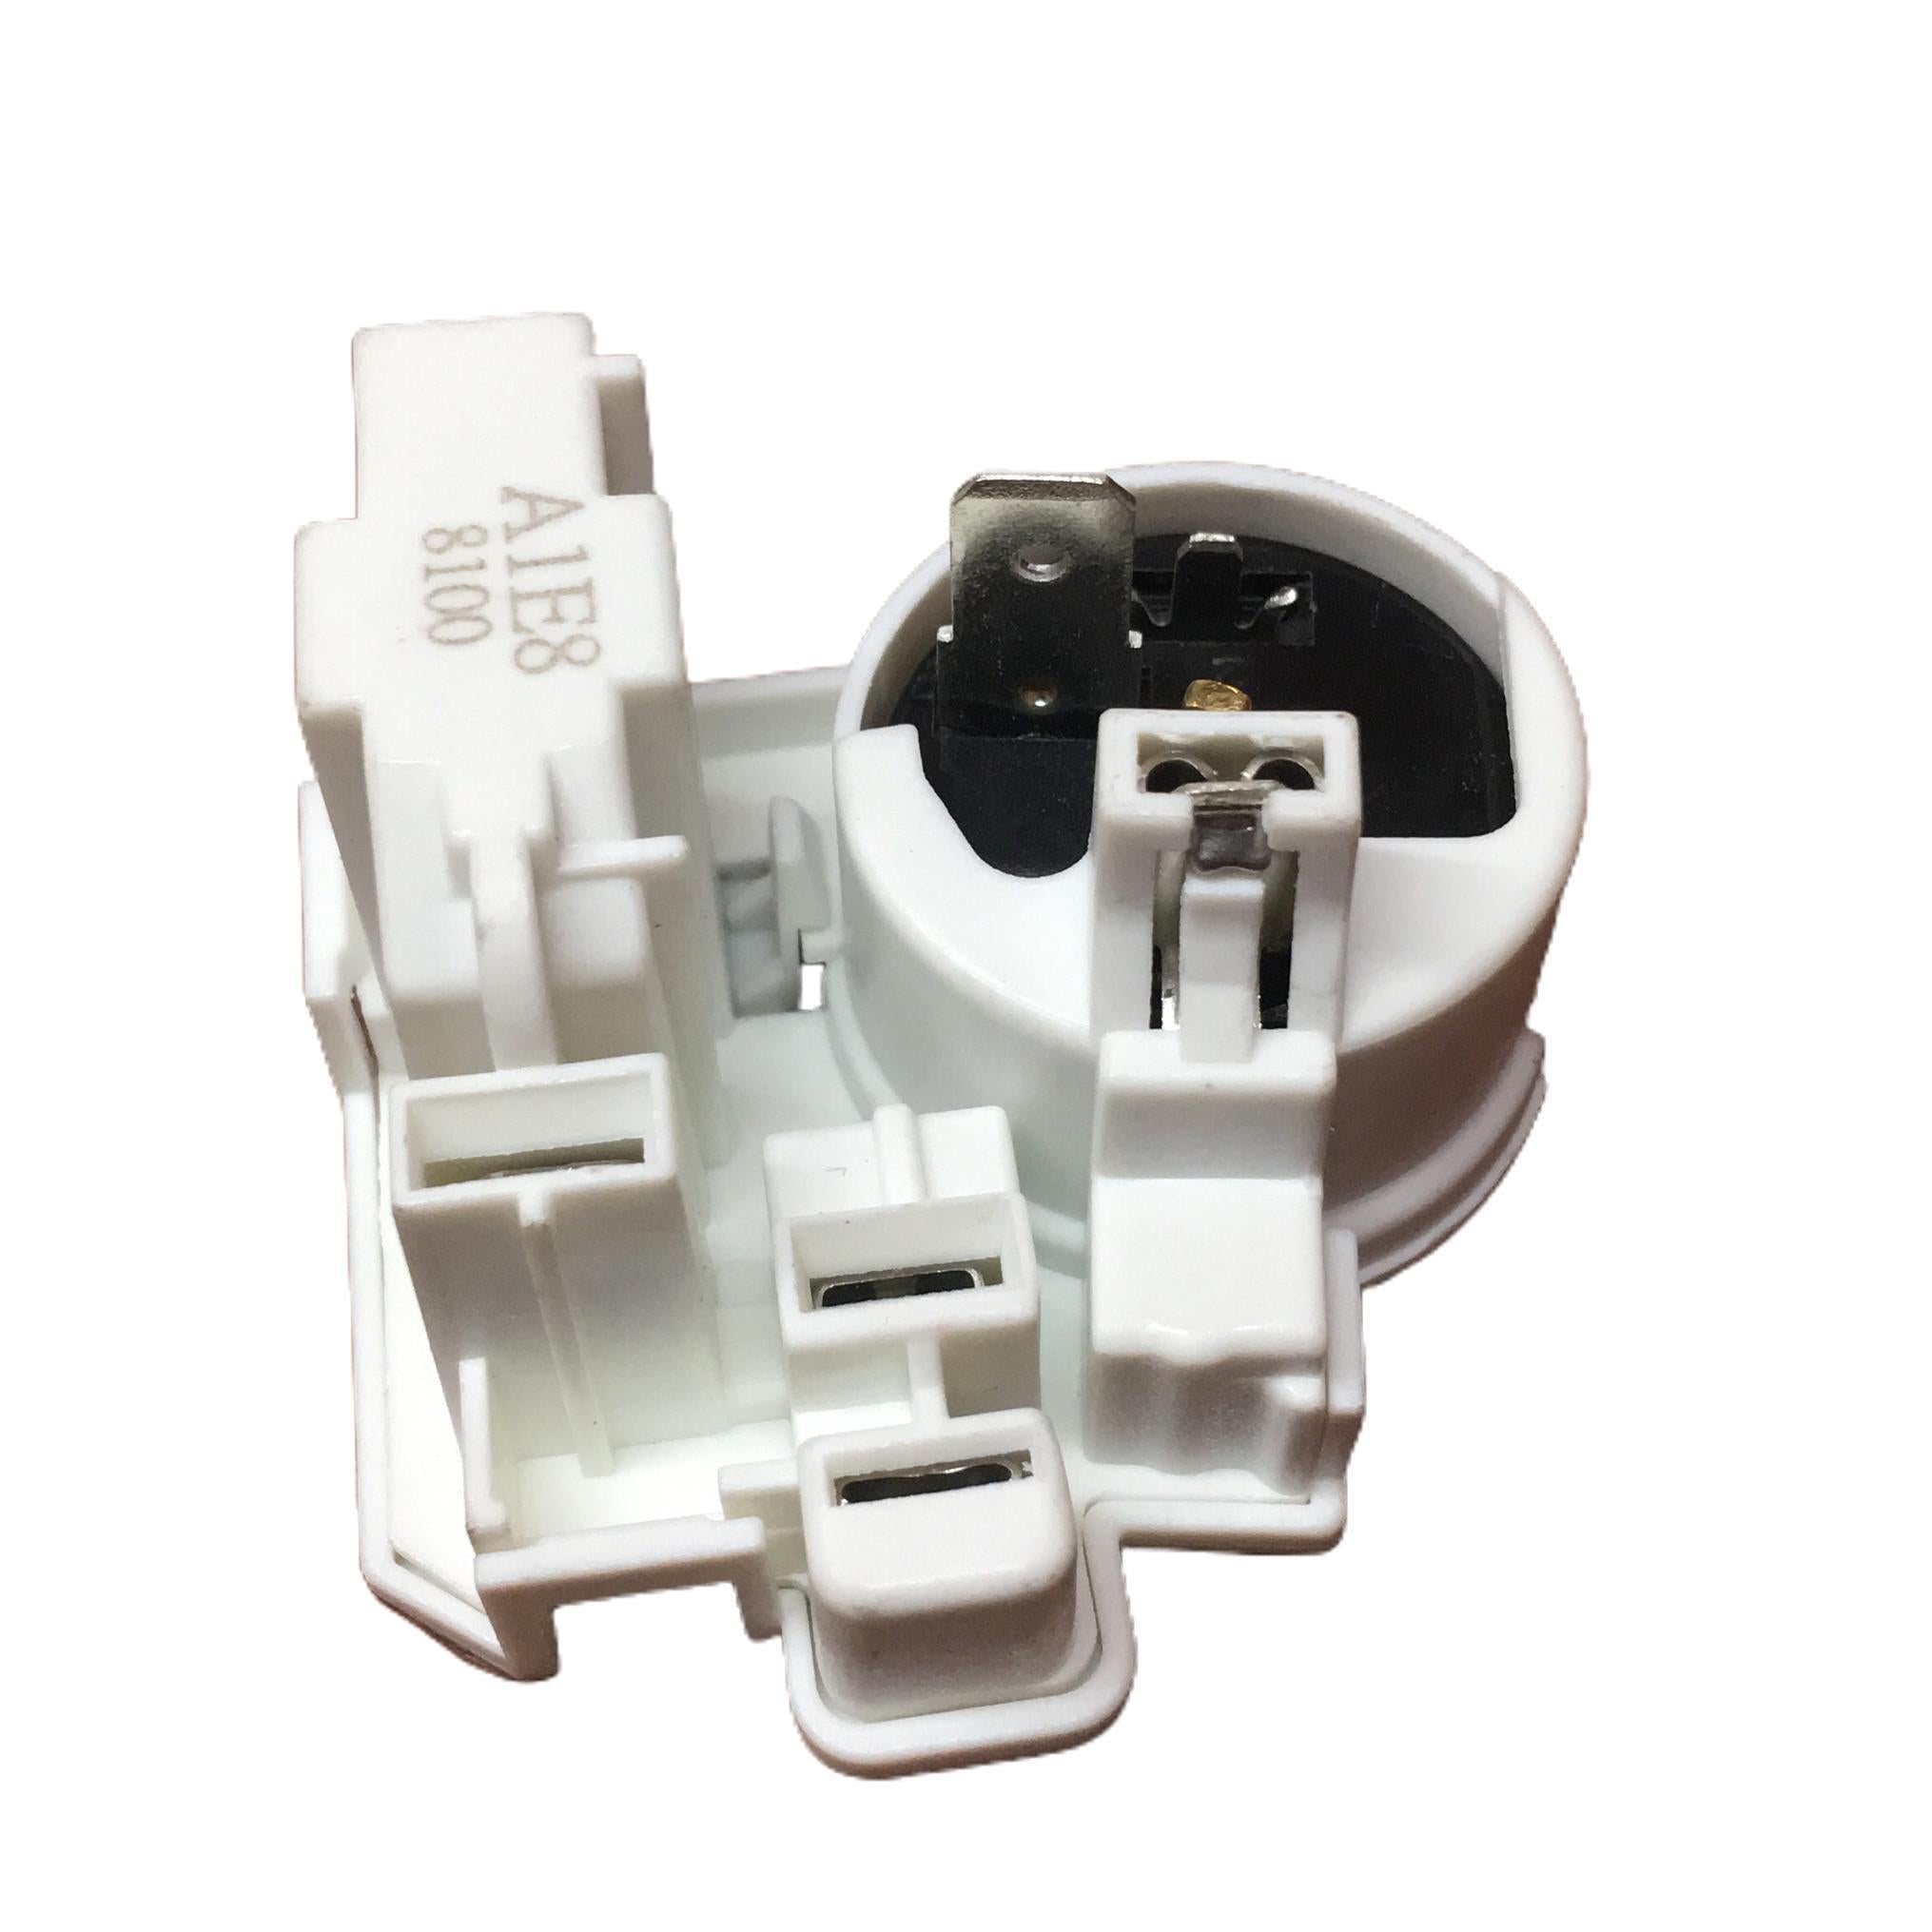 Refrigerator Overload Thermal Protector Relay Starter 3Pin-Refrigeration-Archies Hardware-1/5HP-diyshop.co.za